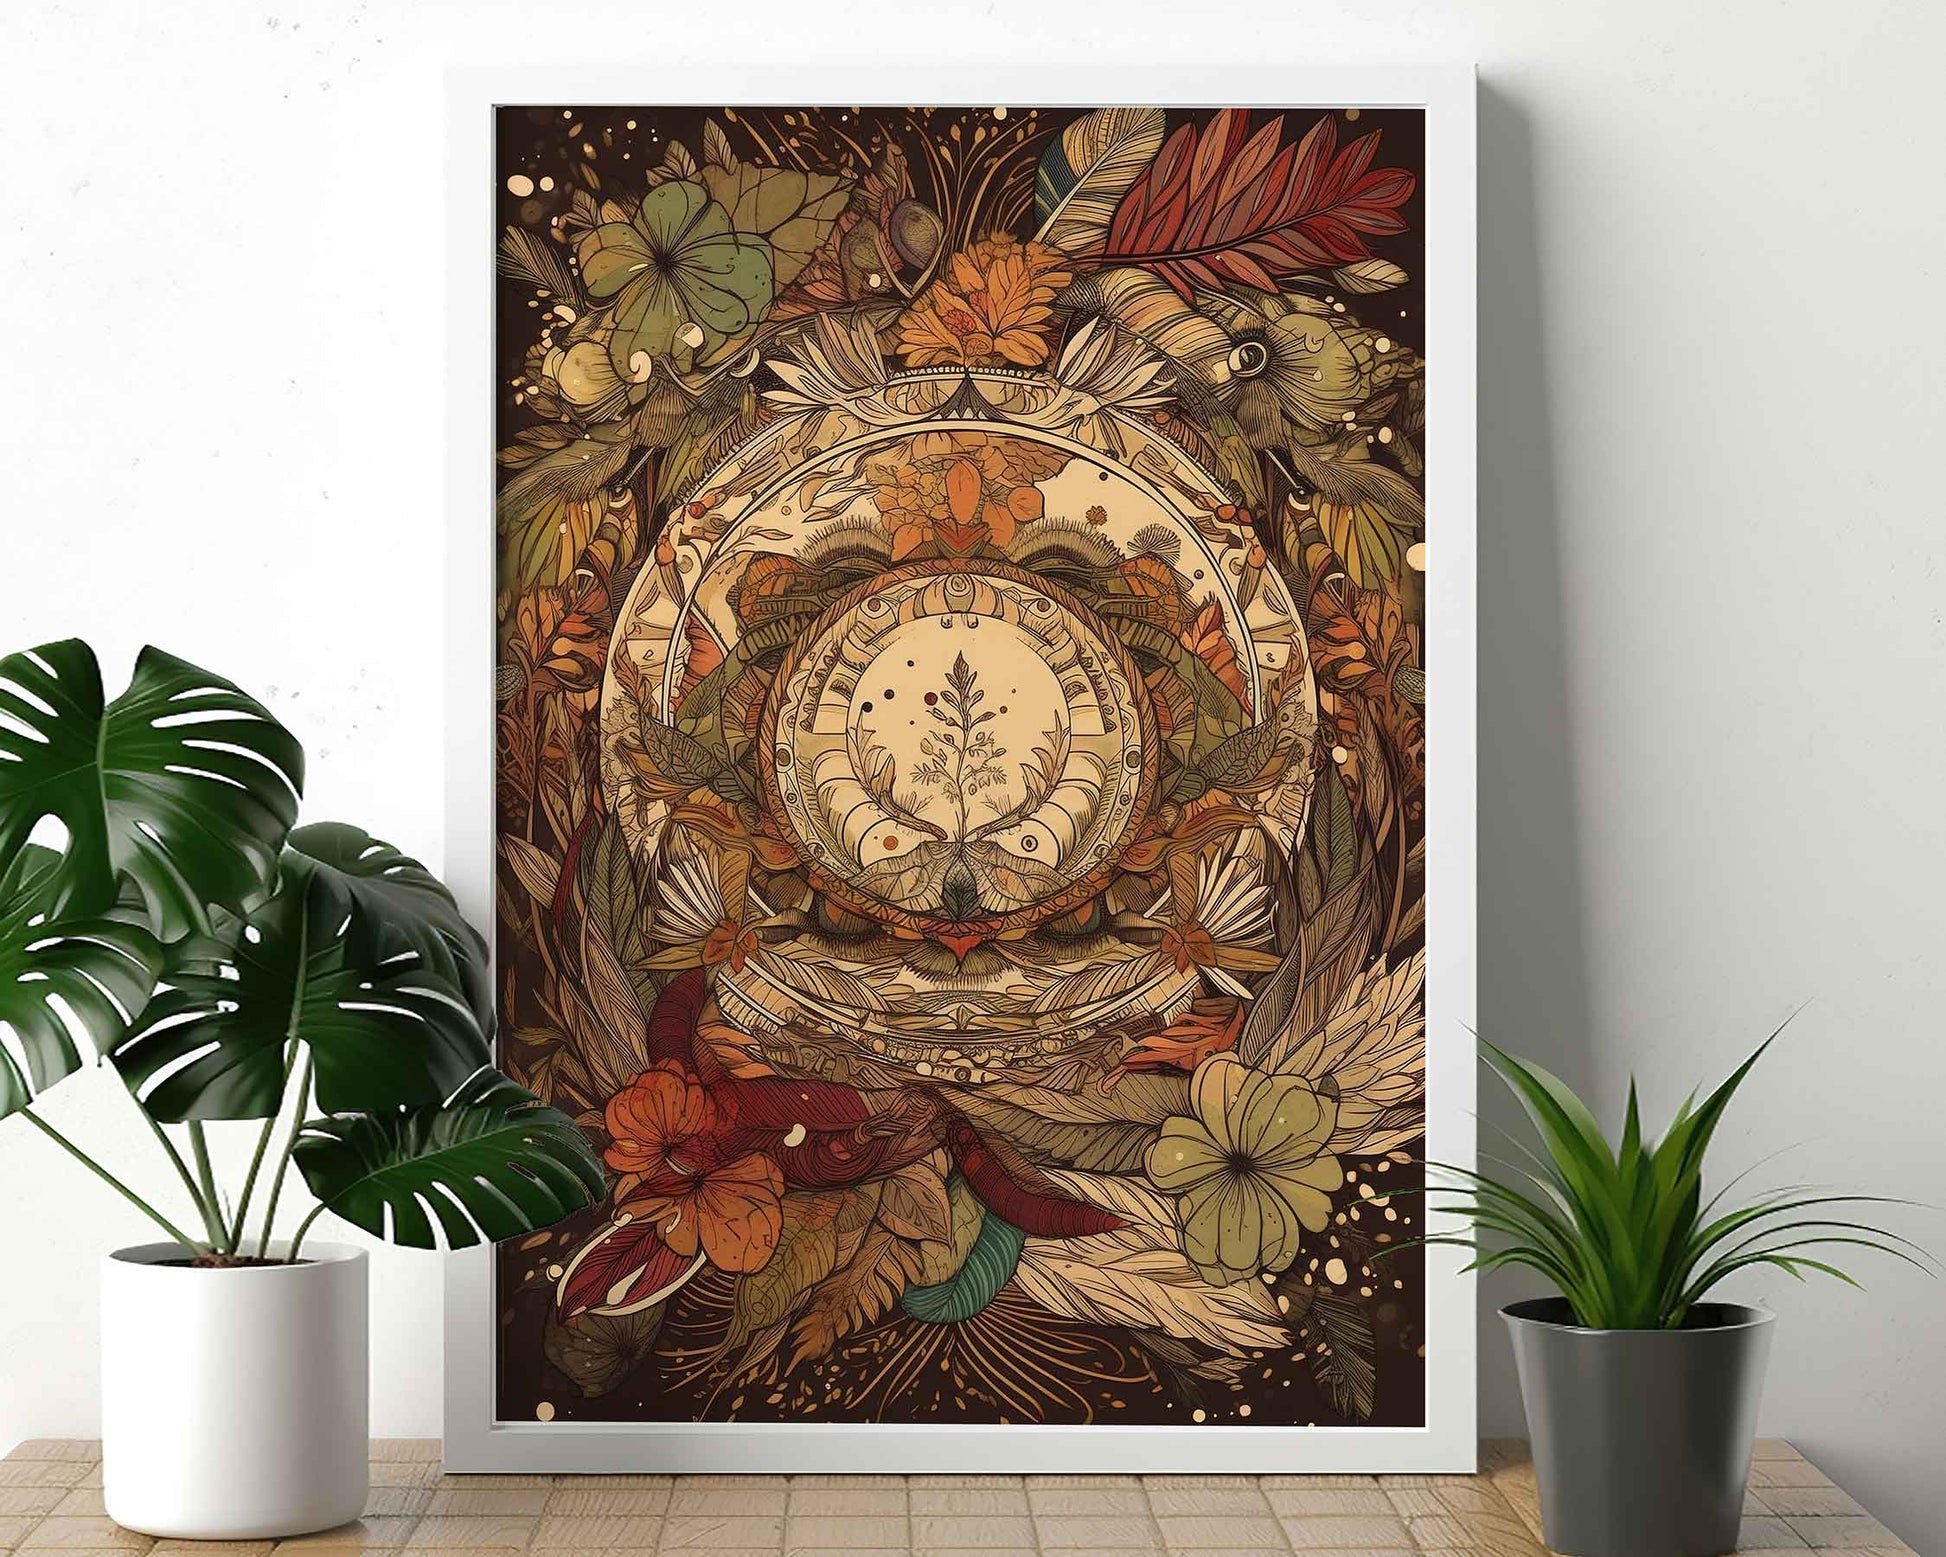 Framed Image of Mandala Boho Earth Tones Feathers and Flowers Wall Art Poster Prints